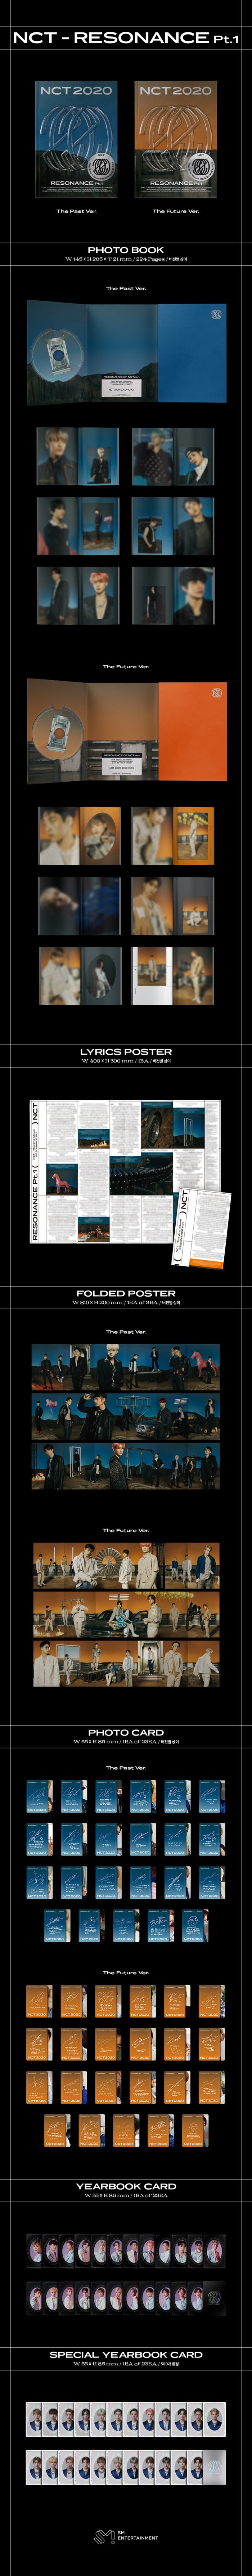 1 CD
1 Folding Poster On Pack
1 Booklet
1 Photo Card
1 Lyrics Paper
1 Yearbook Card